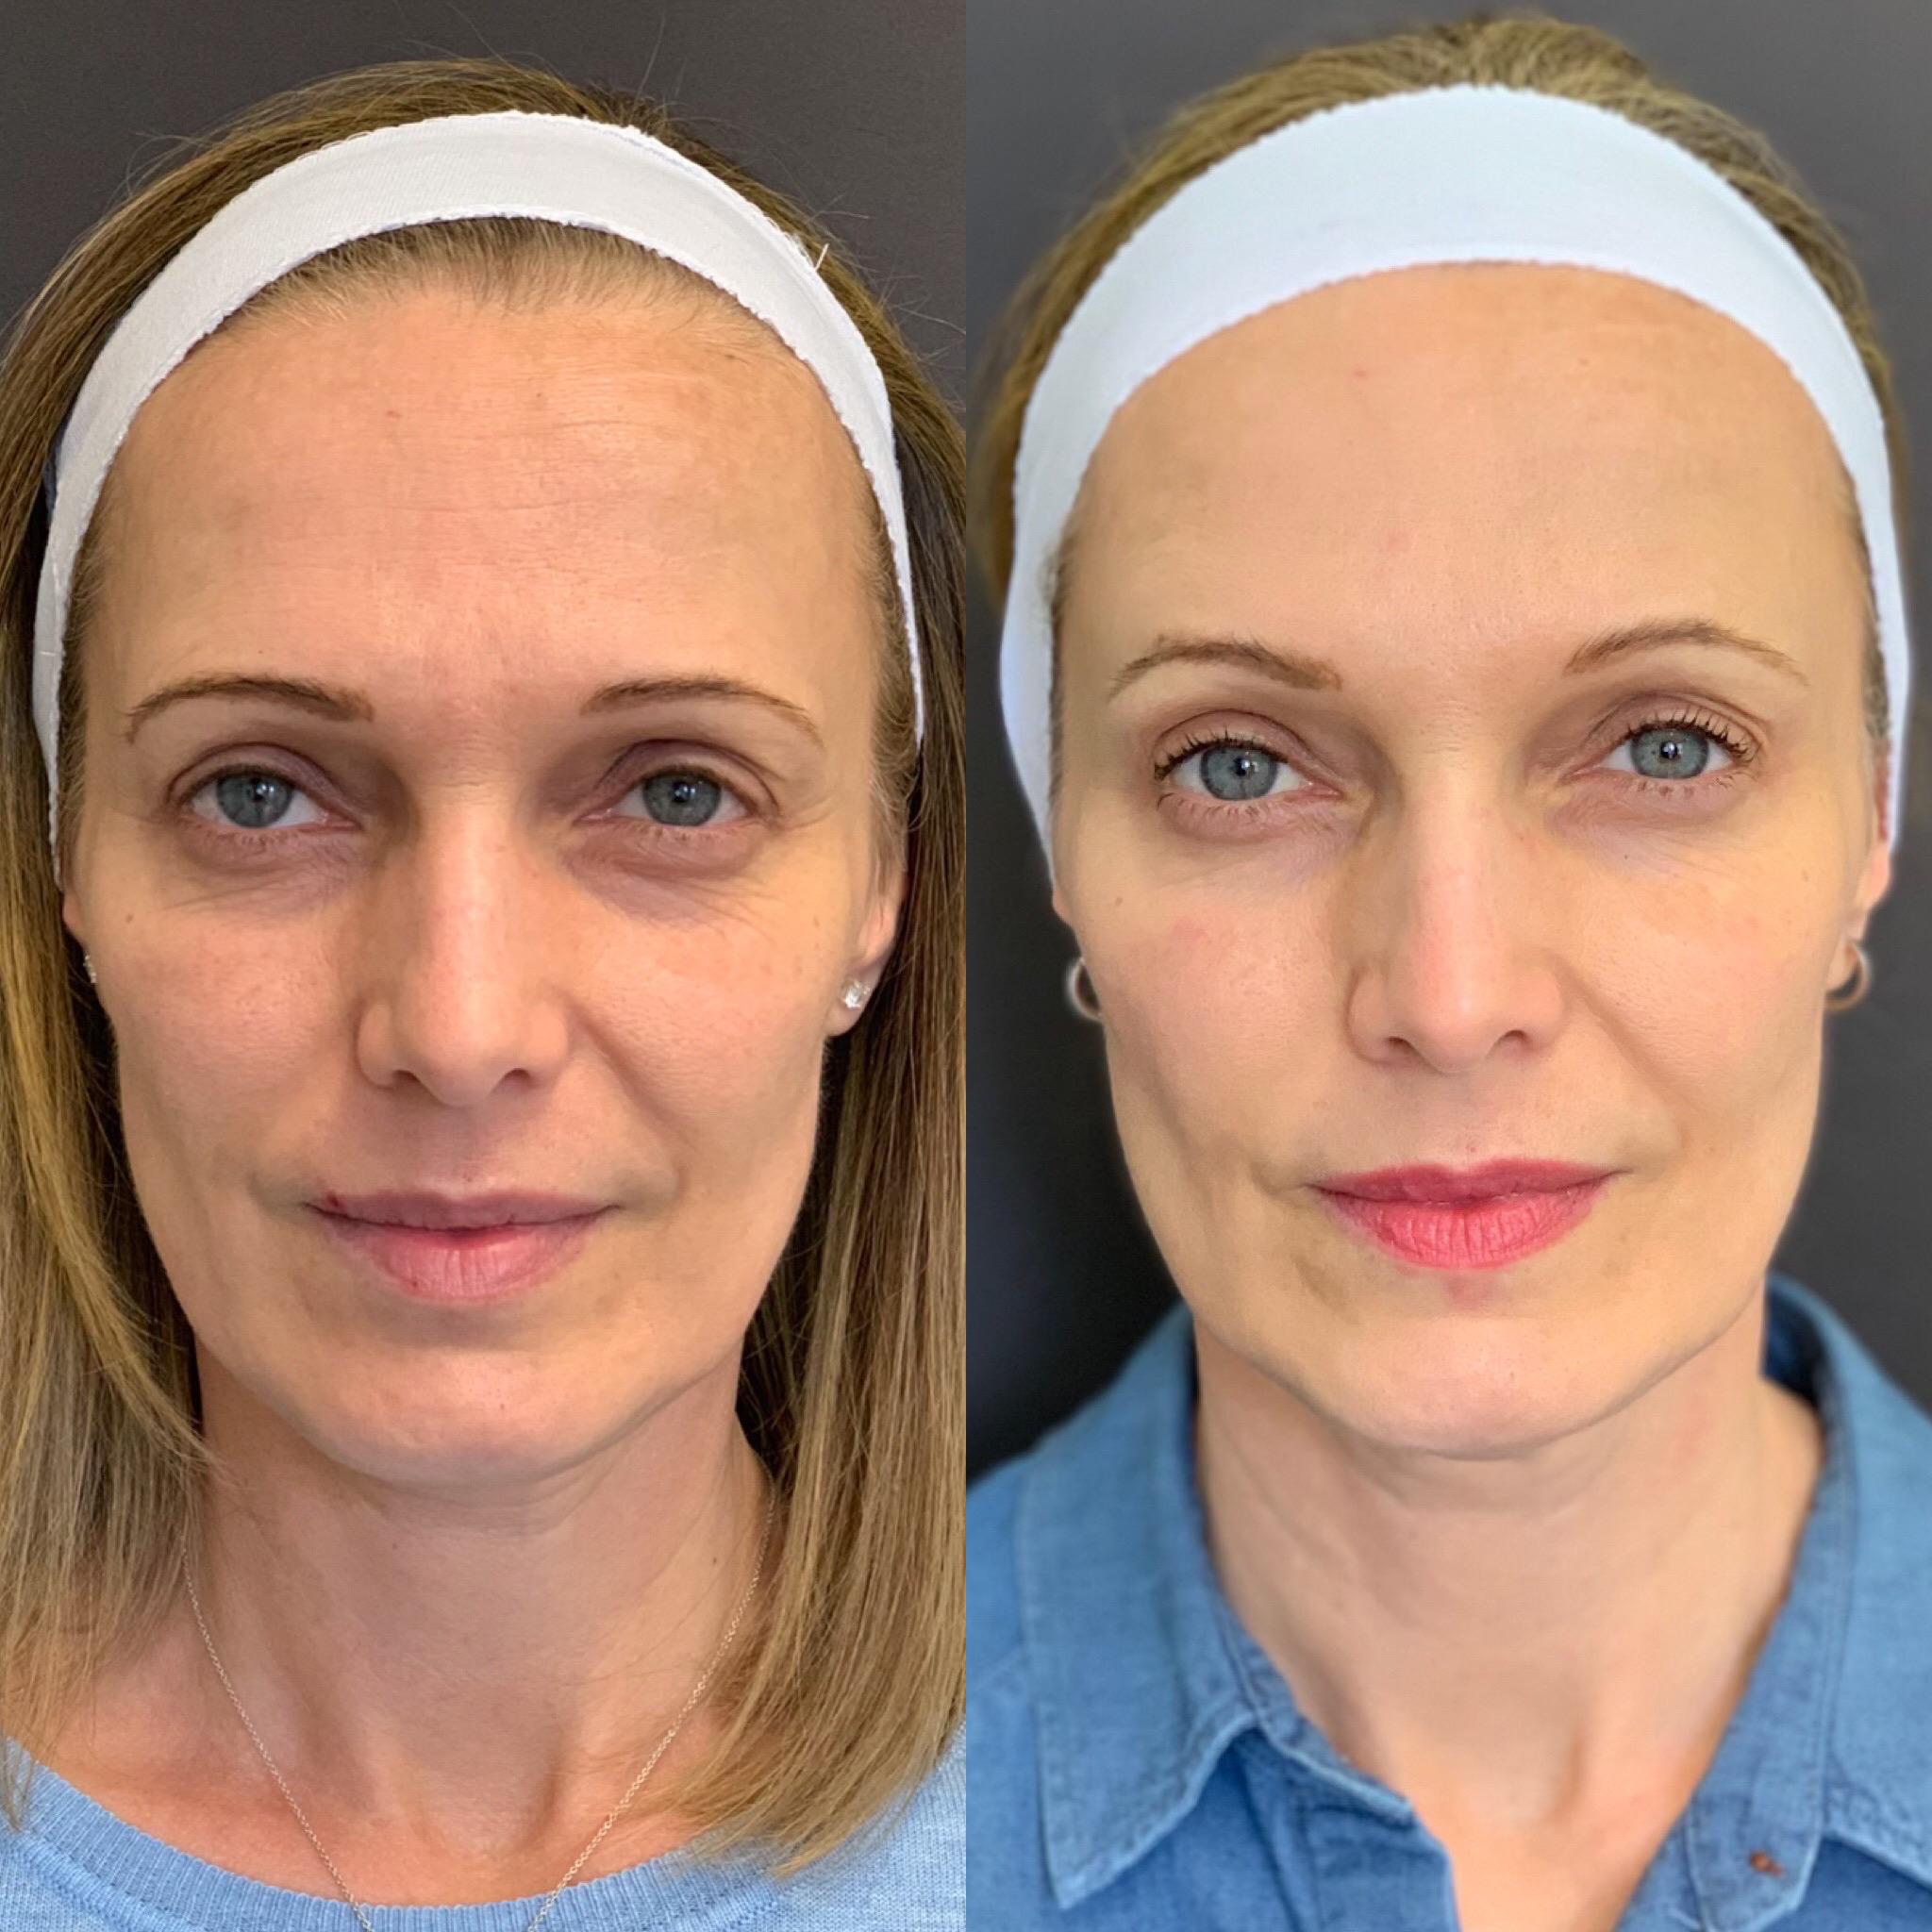 Image showing before and after results of 2 syringes of restylane Lyft for cheek definition and 50 units of Botox.